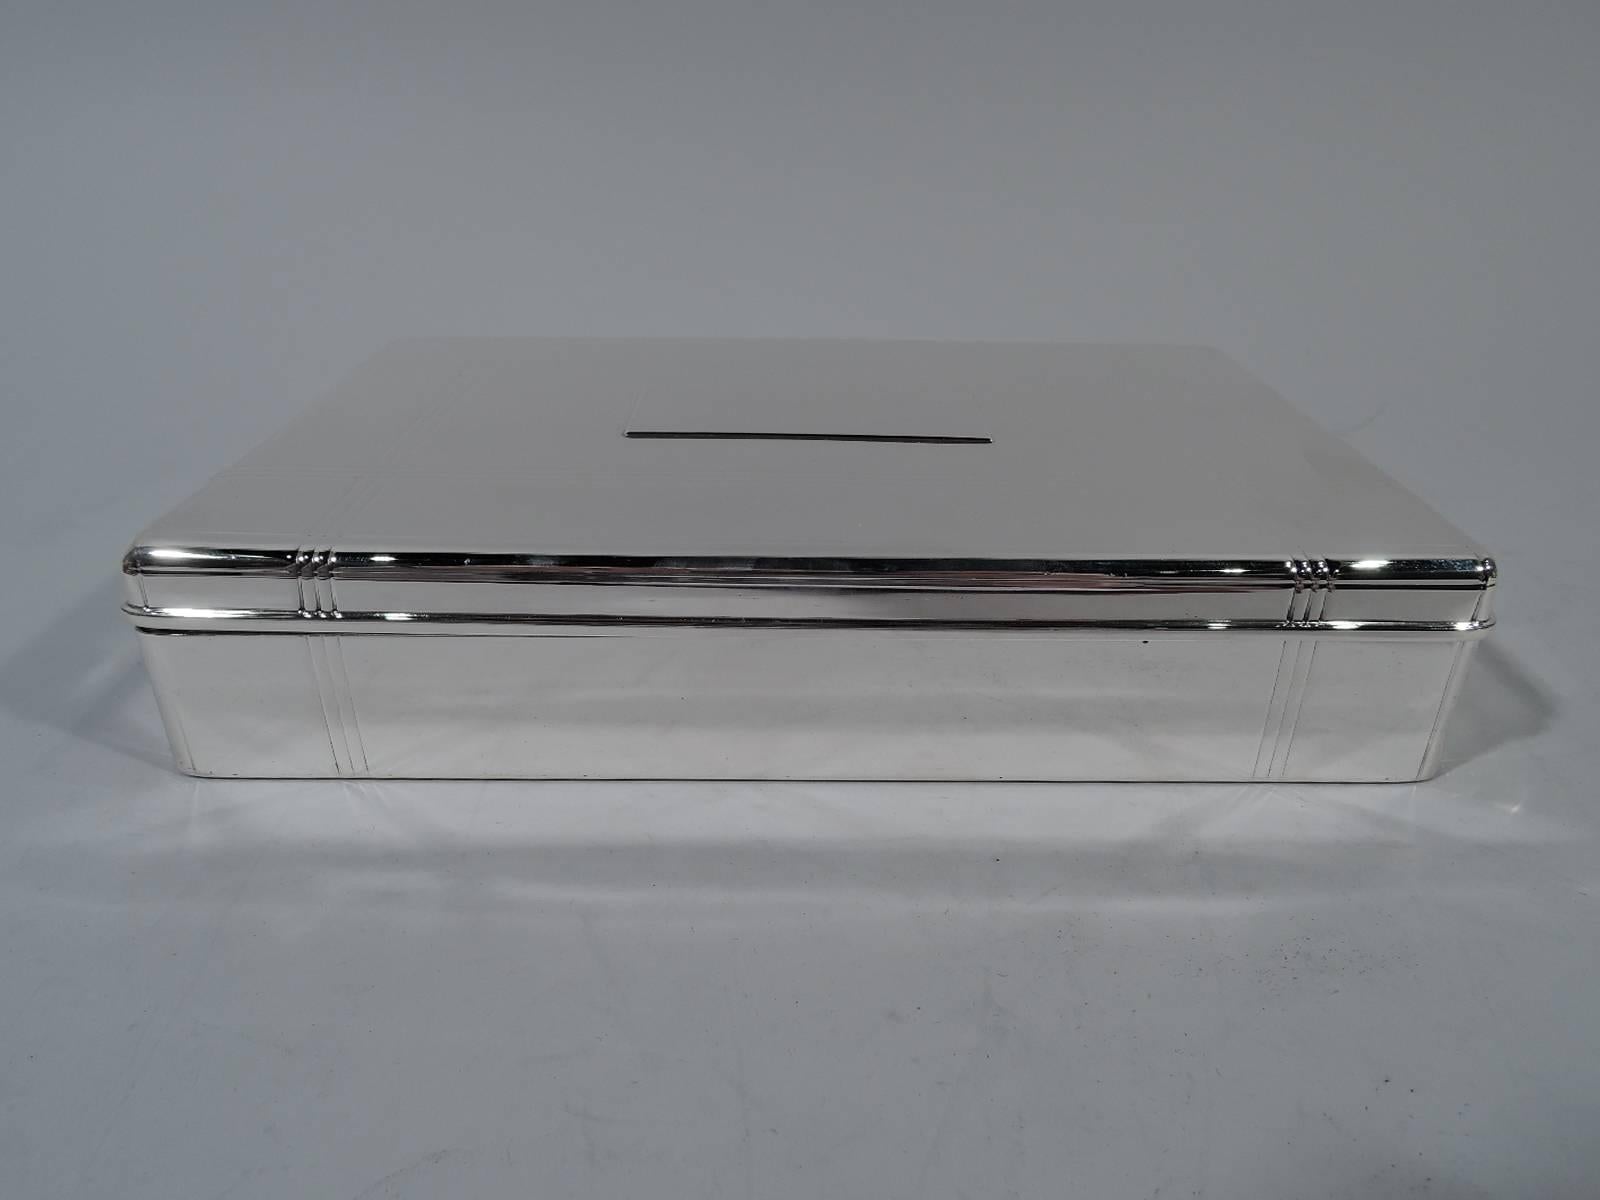 Art Deco sterling silver desk box. Made by Tiffany & Co. in New York, circa 1928. Rectangular with straight sides and curved corners. Cover hinged with molded rim. Cover has four intersecting linear bands that continue on sides. Rectangular tablet